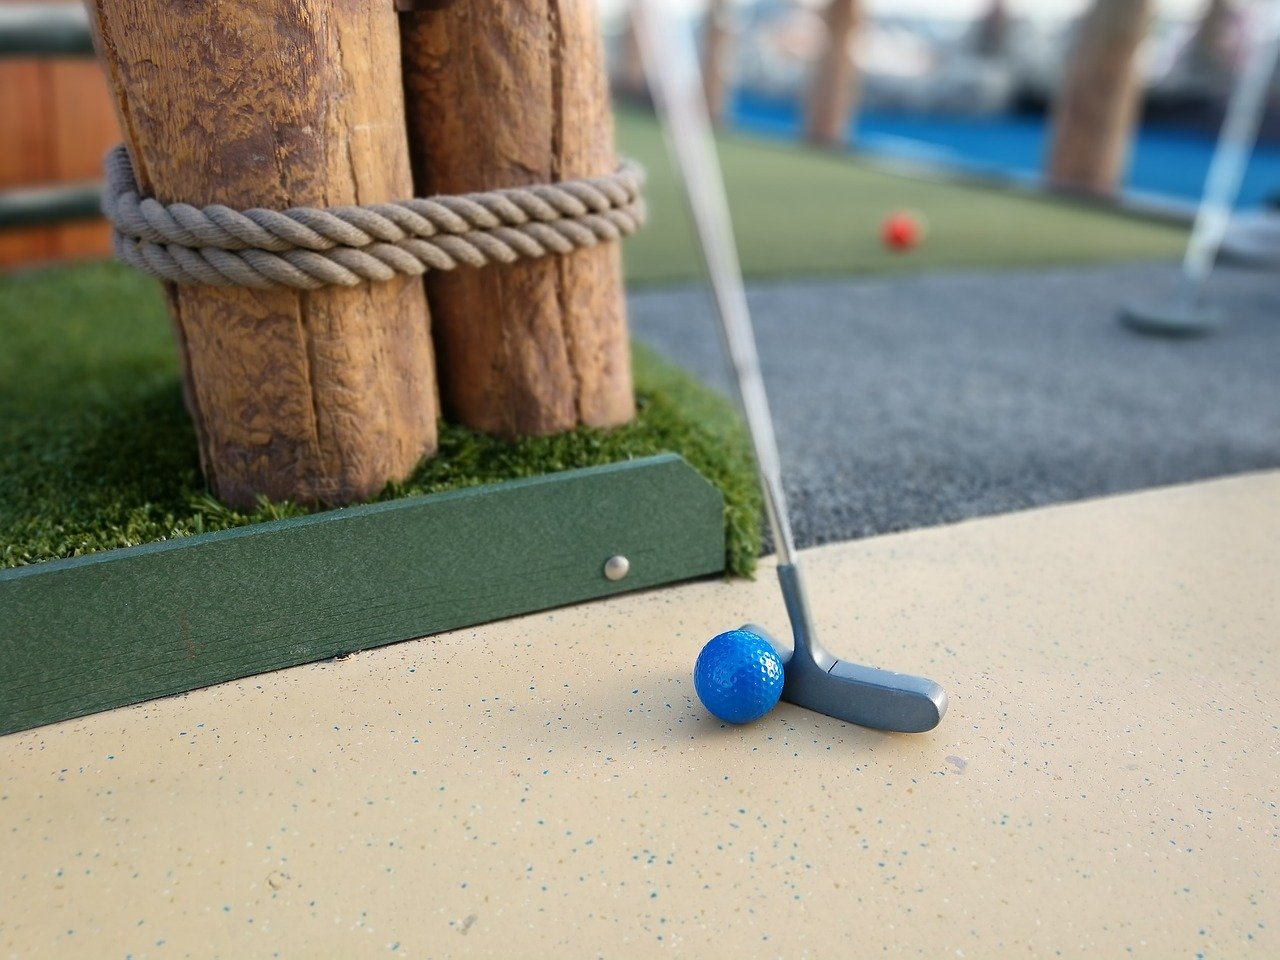 A blue golf ball and metal golf putter leaning up against a 2 wooden posts that are tied together with rope, anchored in green artificial turf.